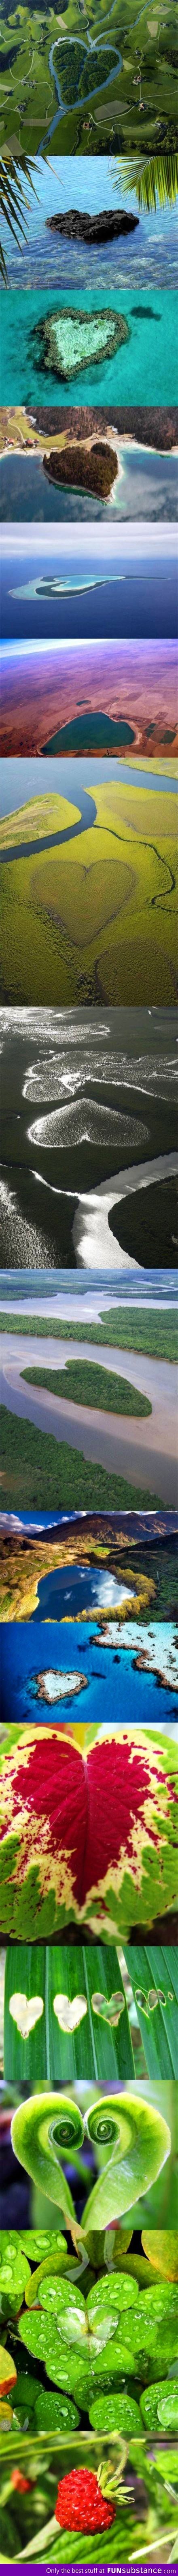 Heart shapes in nature